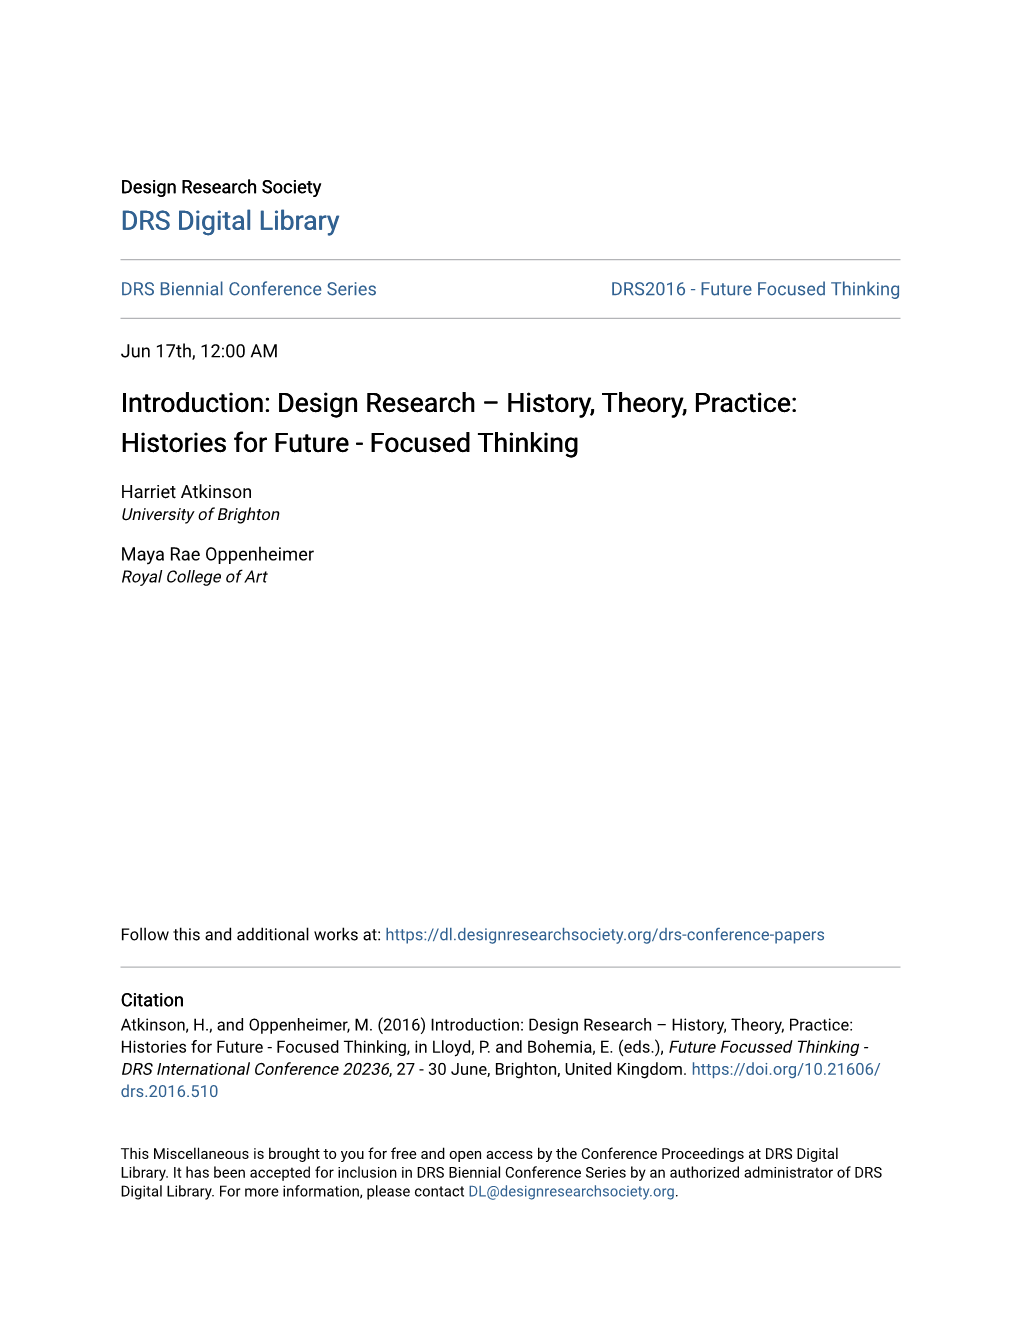 Histories for Future - Focused Thinking